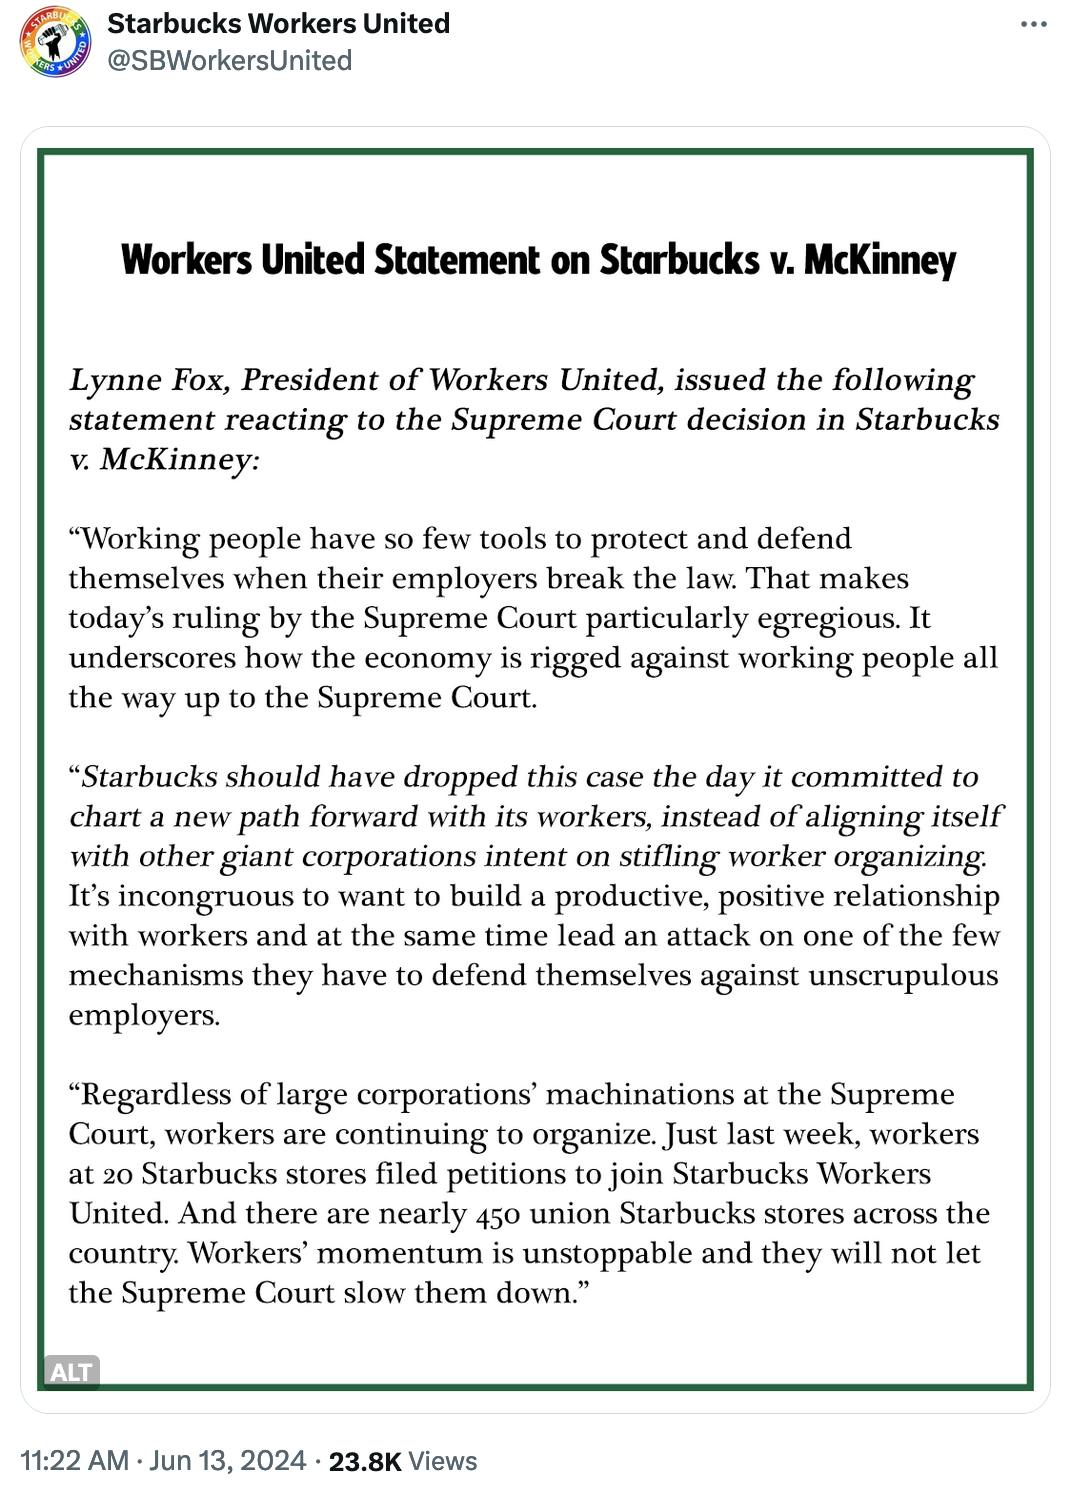 SB Workers United statement Twitter screenshot: “Working people have so few tools to protect and defend themselves when their employers break the law. That makes today’s ruling by the Supreme Court particularly egregious. It underscores how the economy is rigged against working people all the way up to the Supreme Court. “Starbucks should have dropped this case the day it committed to chart a new path forward with its workers, instead of aligning itself with other giant corporations intent on stifling worker organizing. It’s incongruous to want to build a productive, positive relationship with workers and at the same time lead an attack on one of the few mechanisms they have to defend themselves against unscrupulous employers. “Regardless of large corporations’ machinations at the Supreme Court, workers are continuing to organize. Just last week, workers at 20 Starbucks stores filed petitions to join Starbucks Workers United. And there are nearly 450 union Starbucks stores across the country. Workers’ momentum is unstoppable and they will not let the Supreme Court down."